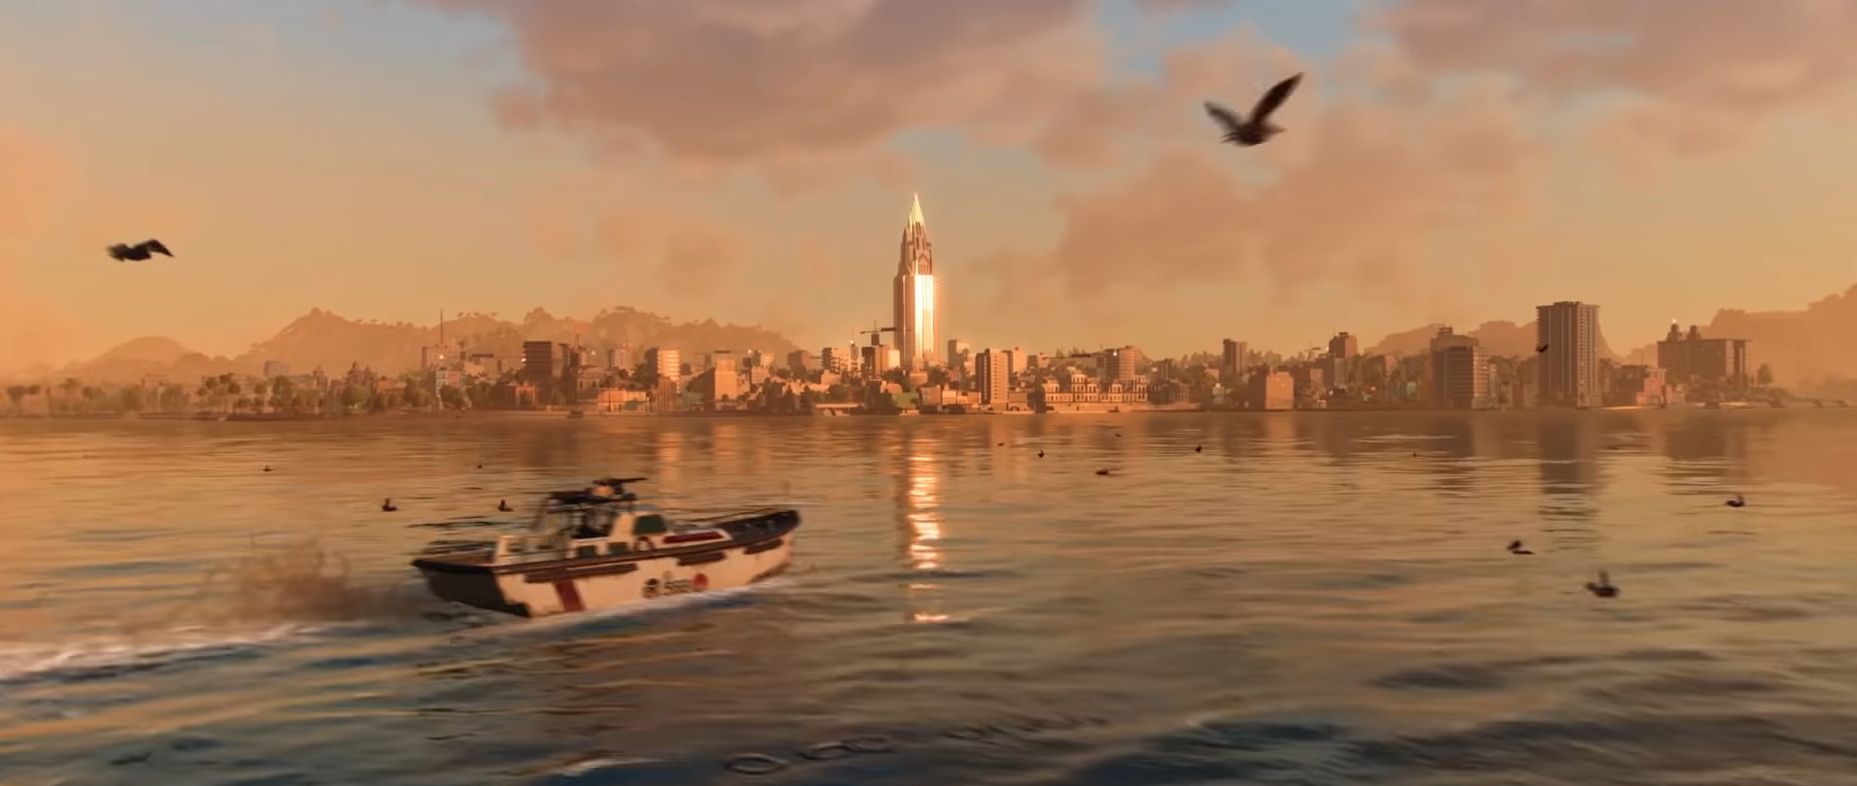 navigating in far cry 6 wingsuit, helicopter, rooftops, boats